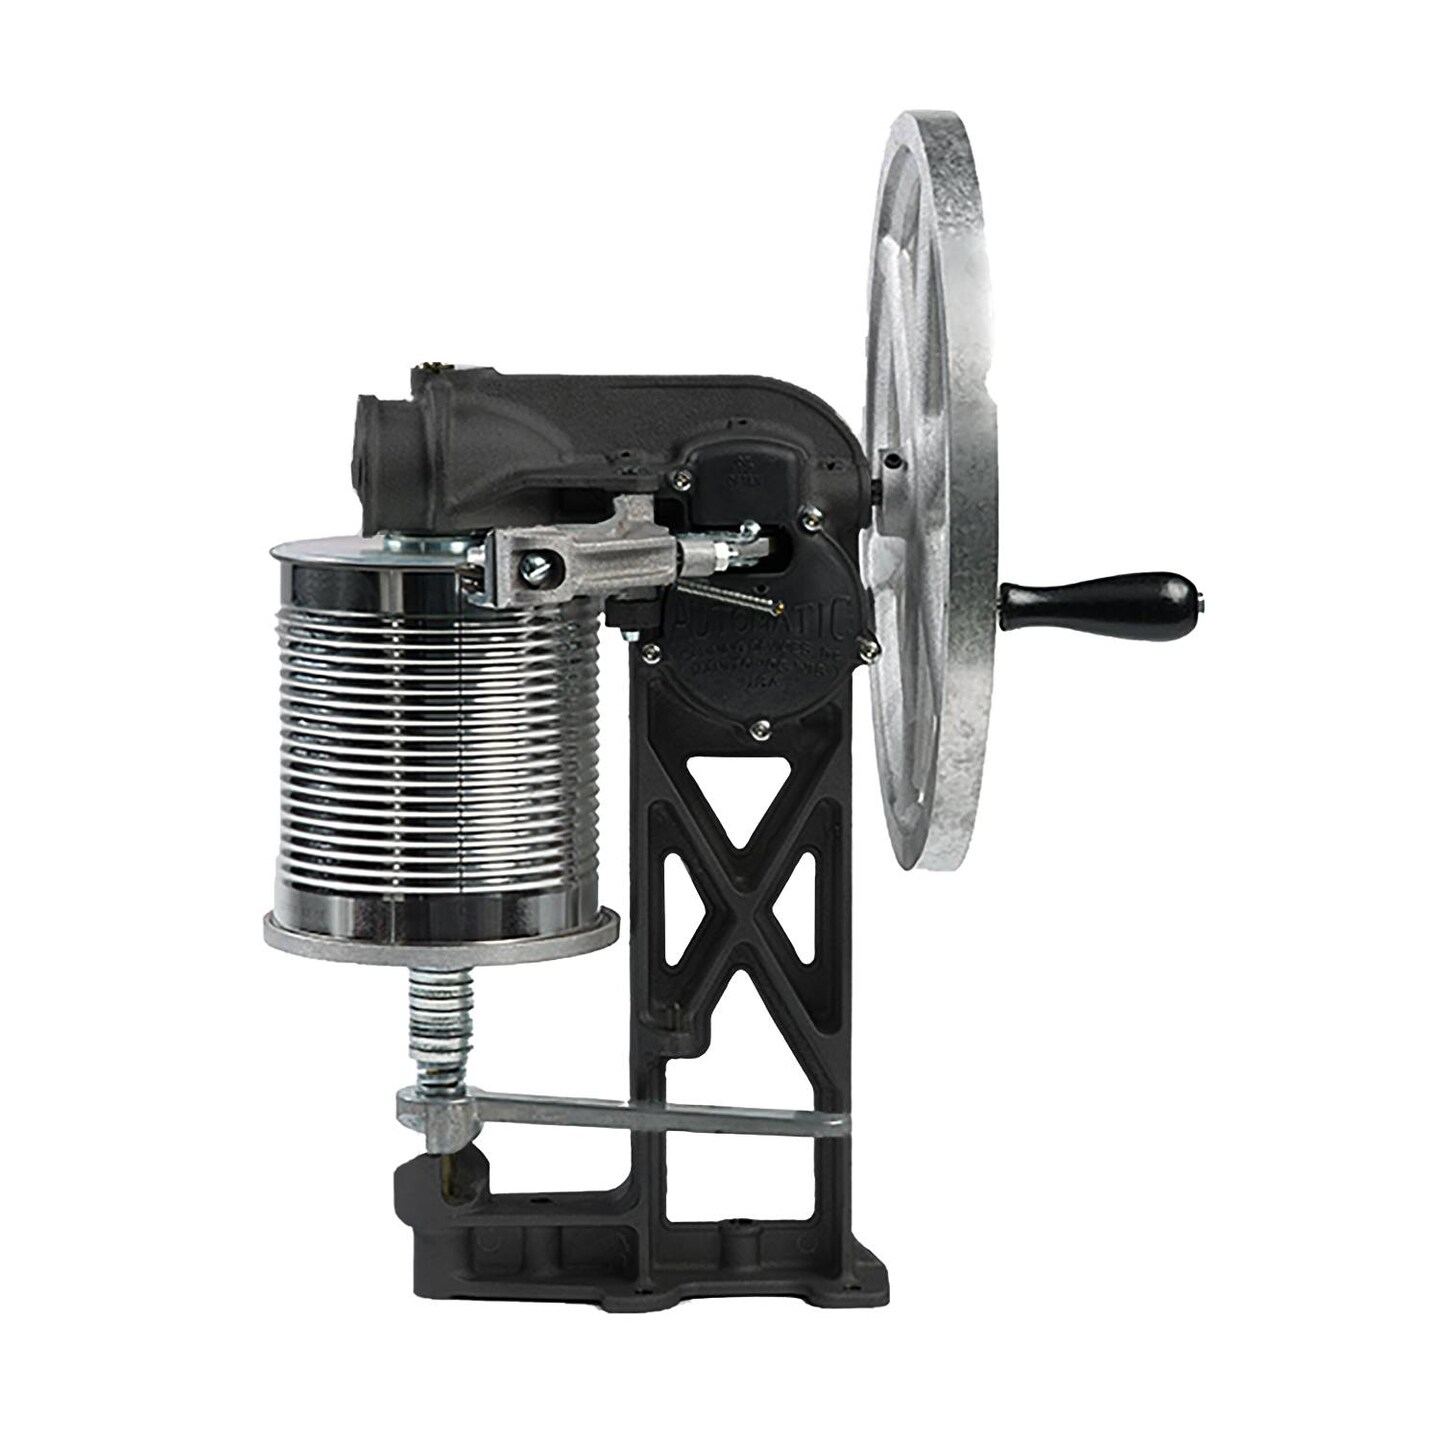 All American No. 10 Can Sealer, Easy Manual Flywheel, Up to 150 Cans per Hour